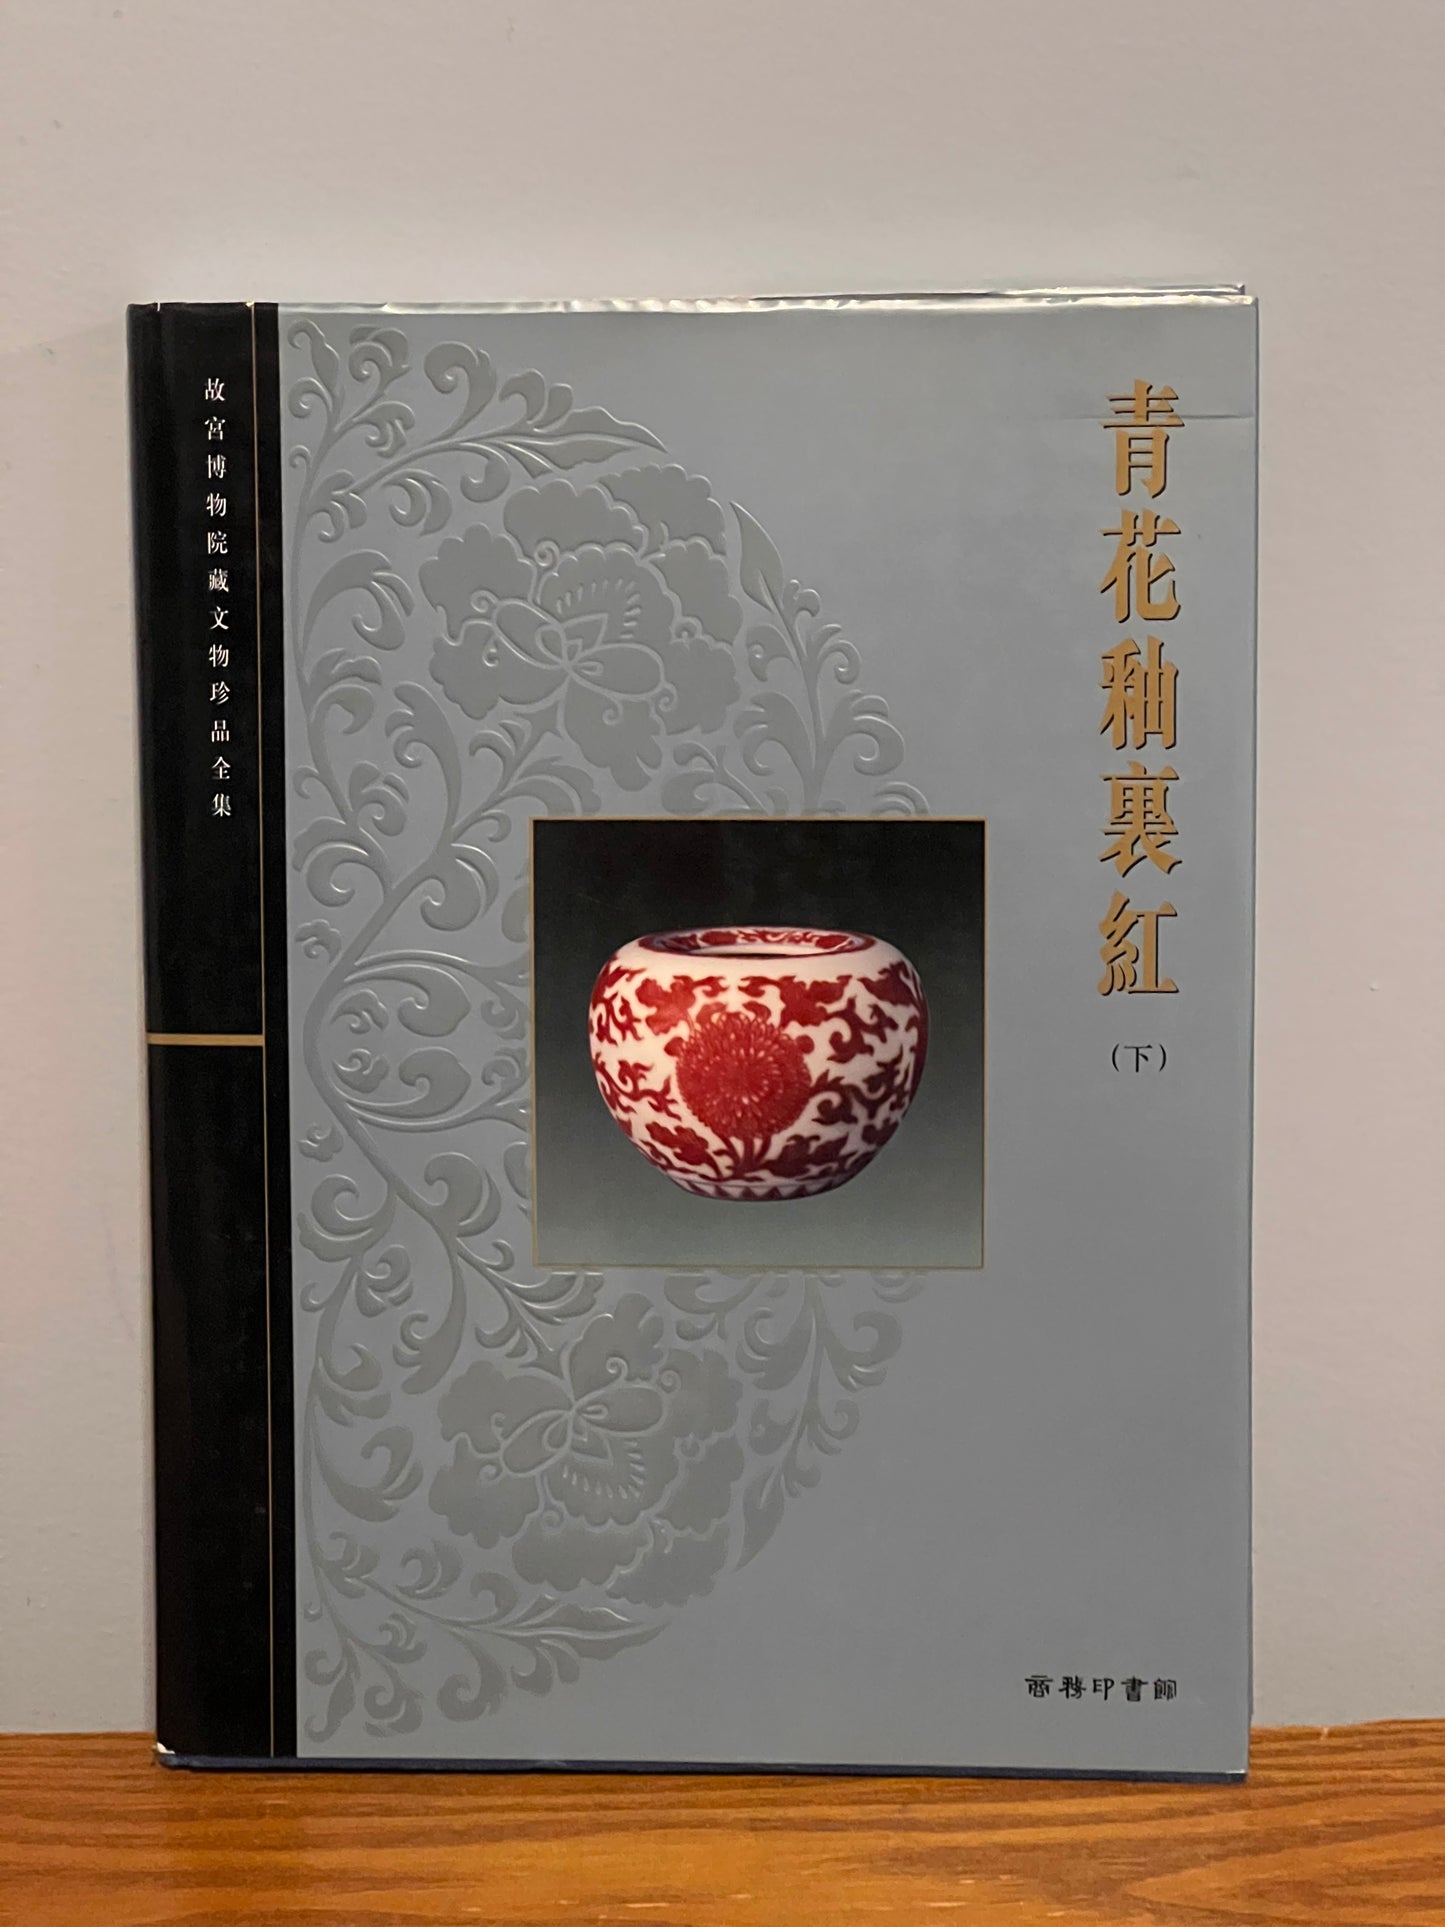 Blue and White Porcelain with Underglazed Red, Book 3 (The Complete Collection of Treasures of The Palace Museum) Hardcover – October 1, 2000